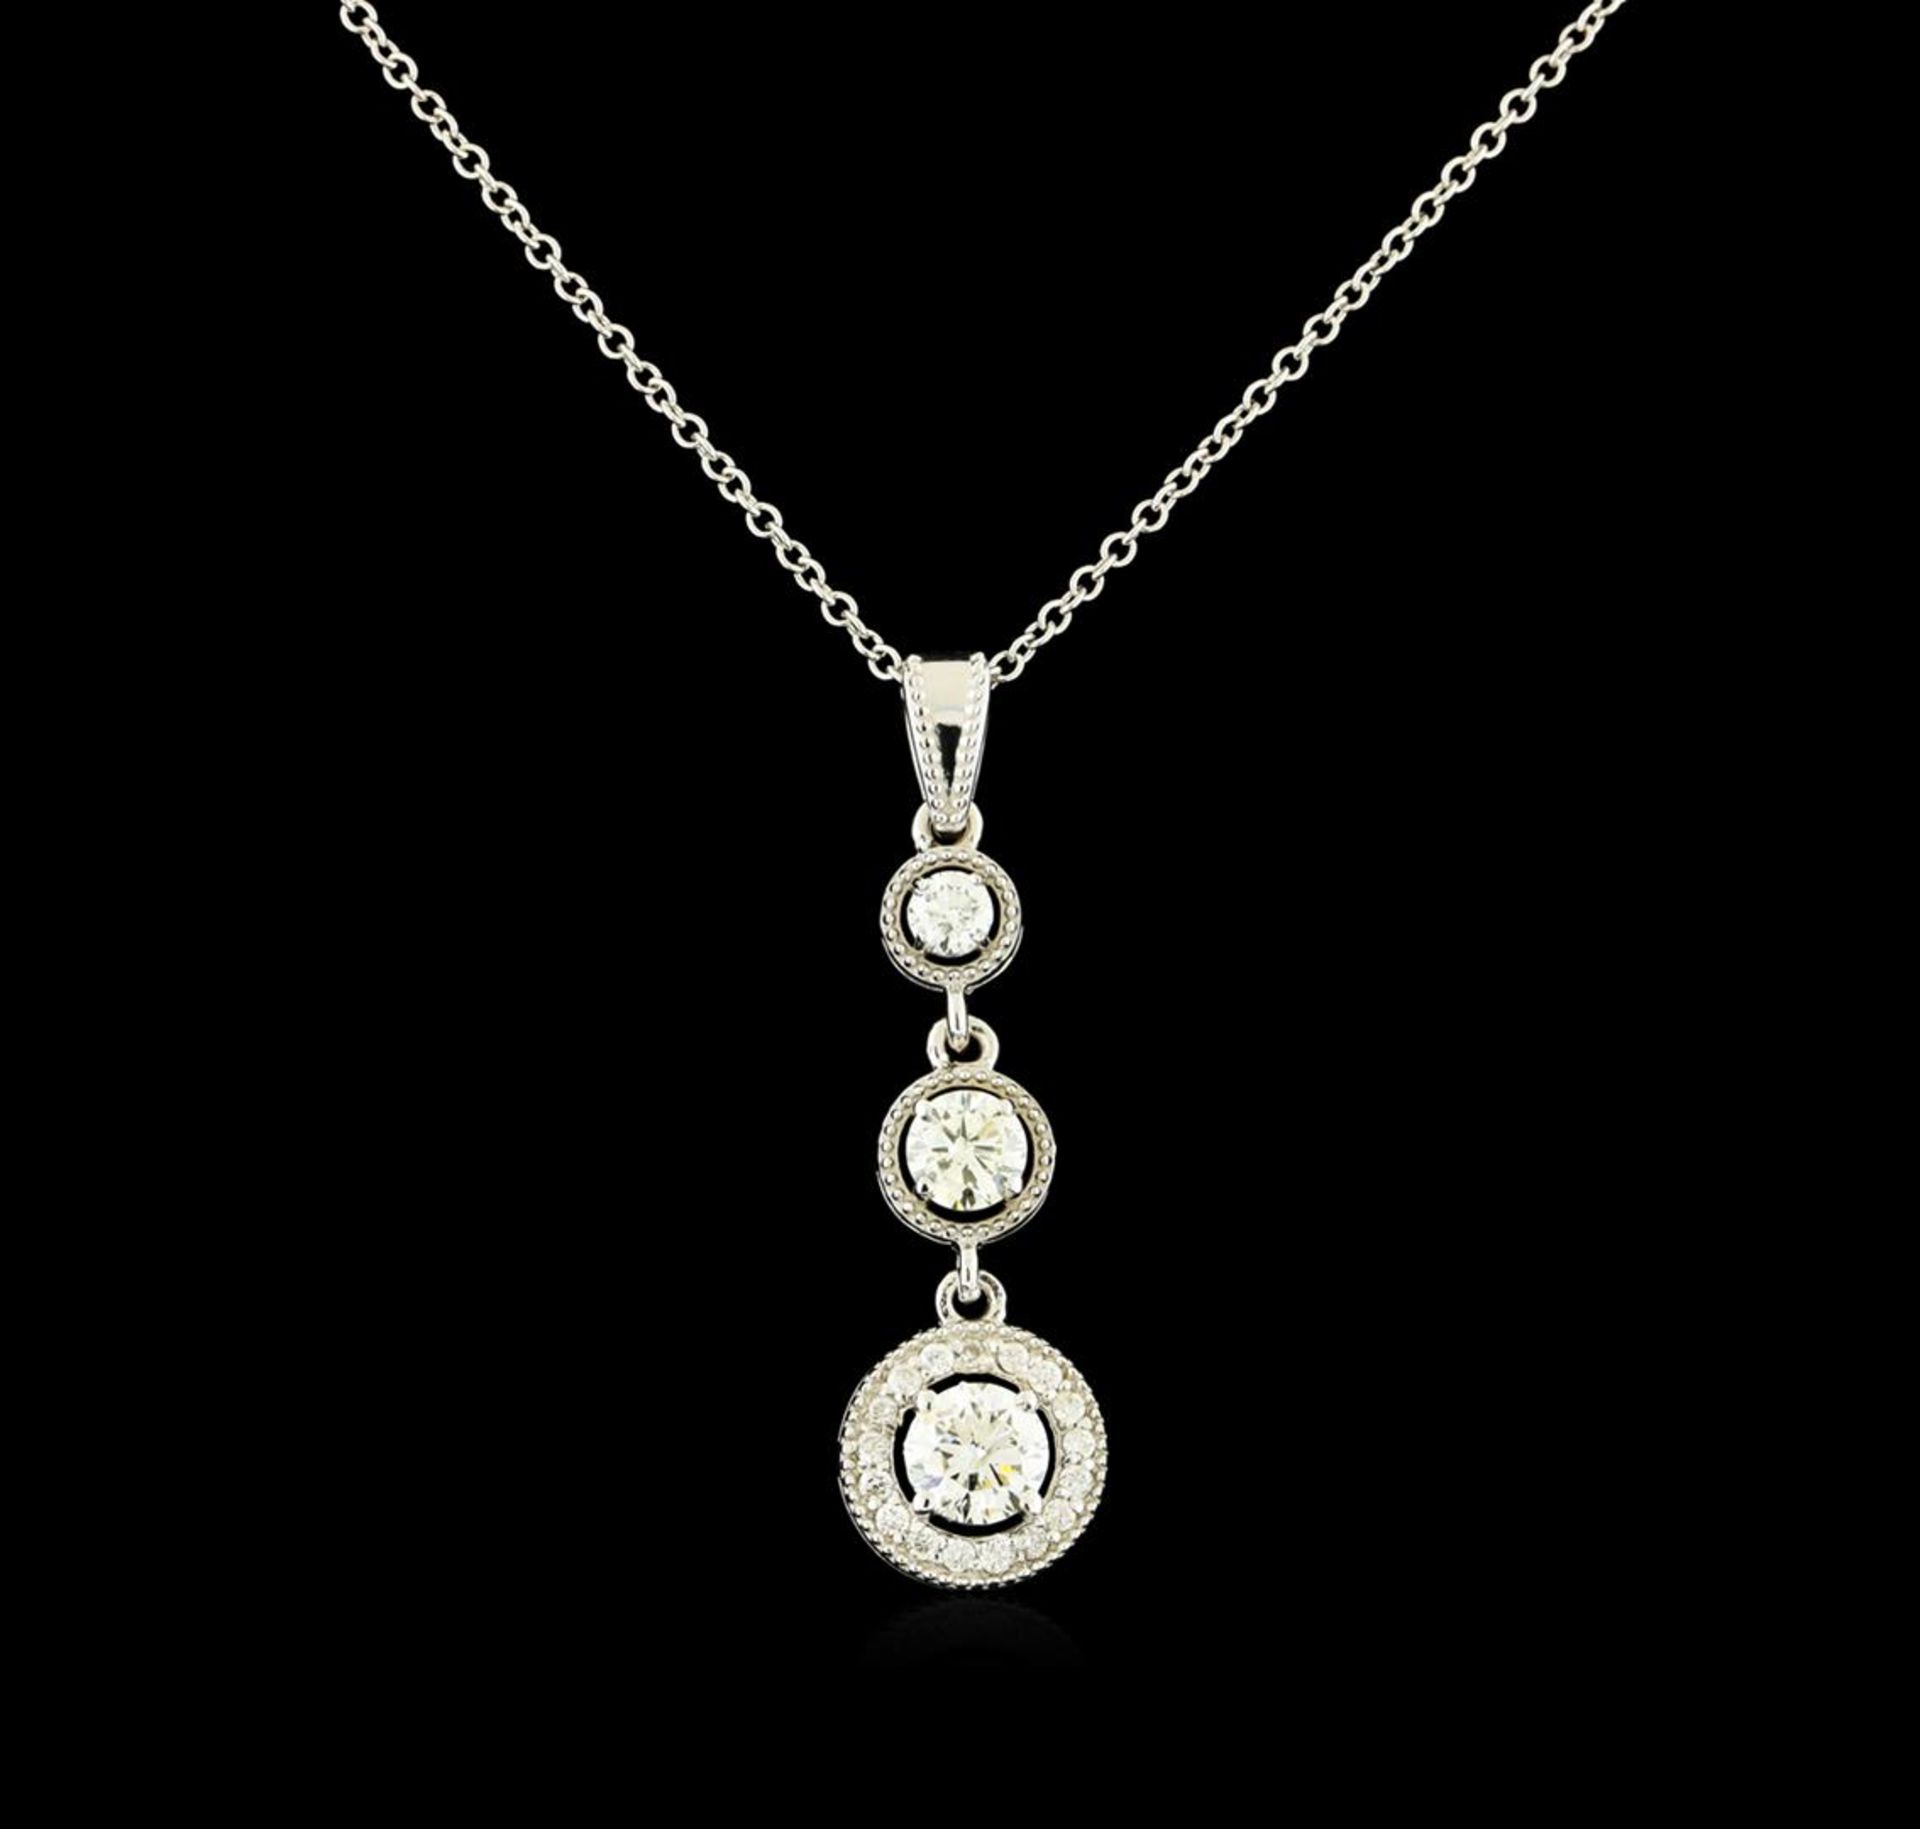 1.06 ctw Diamond Pendant With Chain - 14KT White Gold - Image 2 of 8